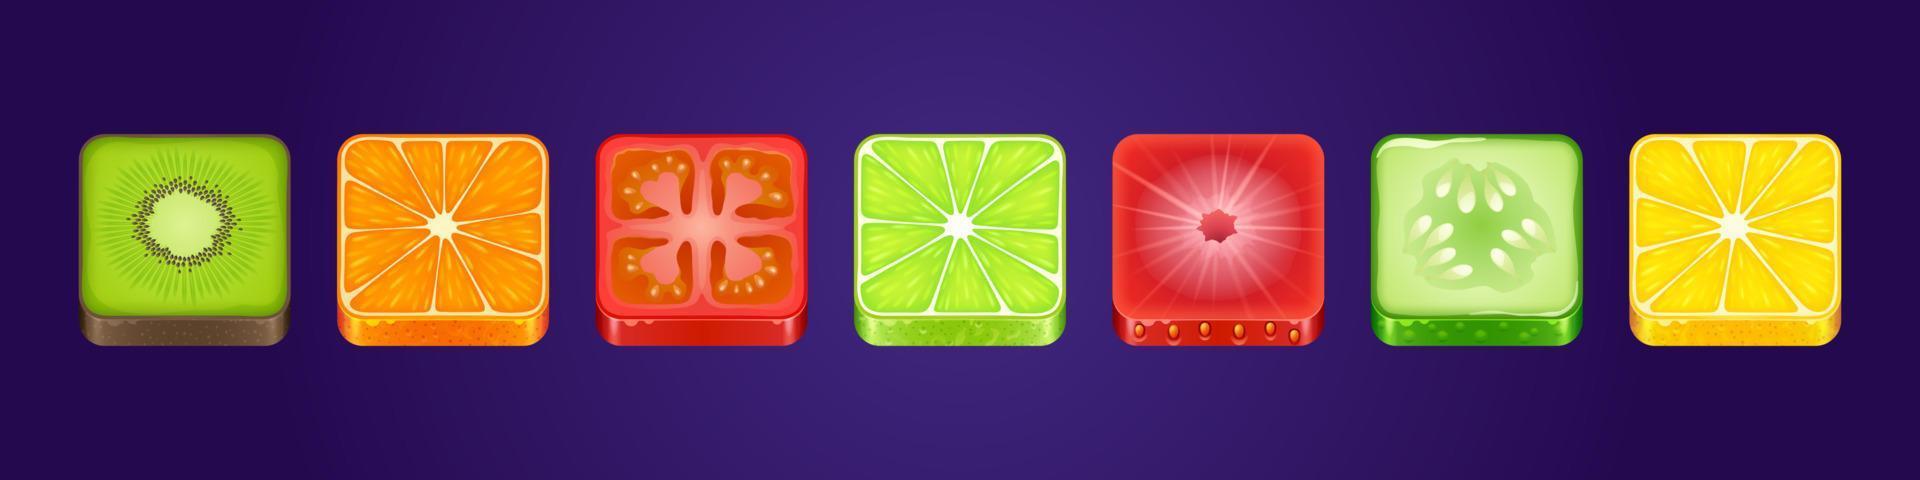 Game ui app icons square food textured buttons set vector